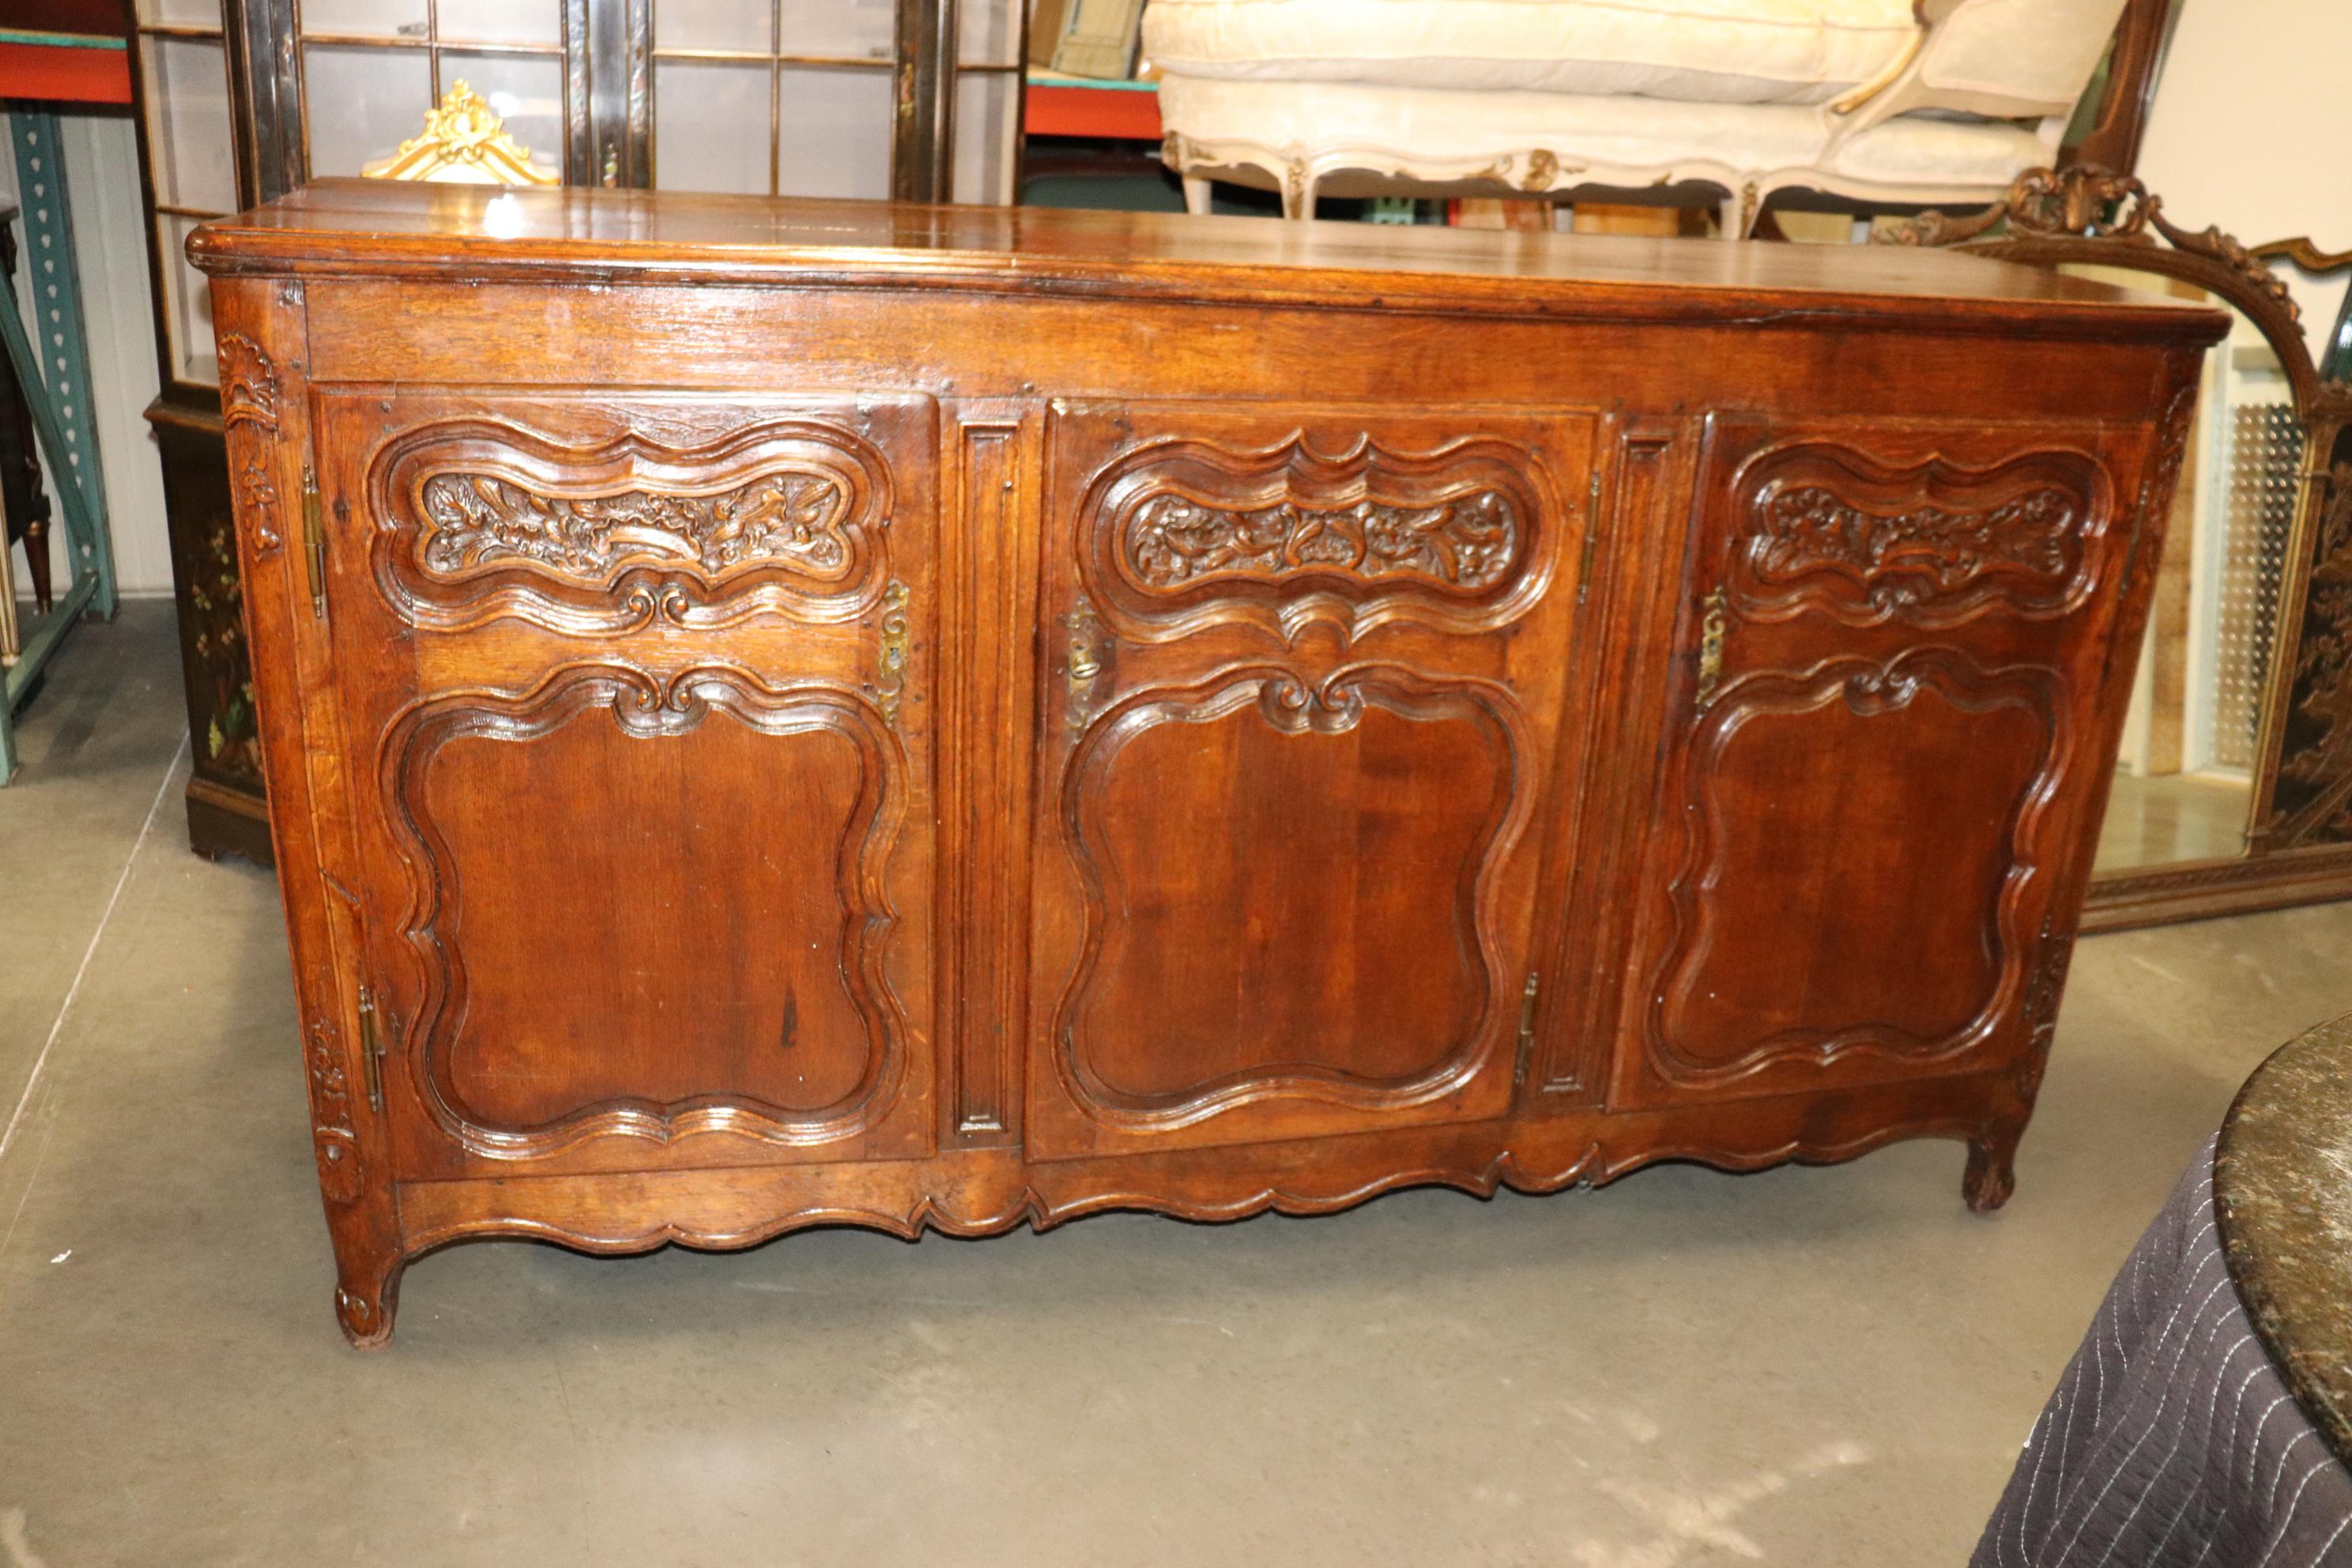 This is a gorgeous French country carved walnut sideboard with hand-hewn backboards and tons of character and age. The size is on the grander scale at 80 wide x 23 deep x 45 tall and the condition is good considering the age and will show time-worn